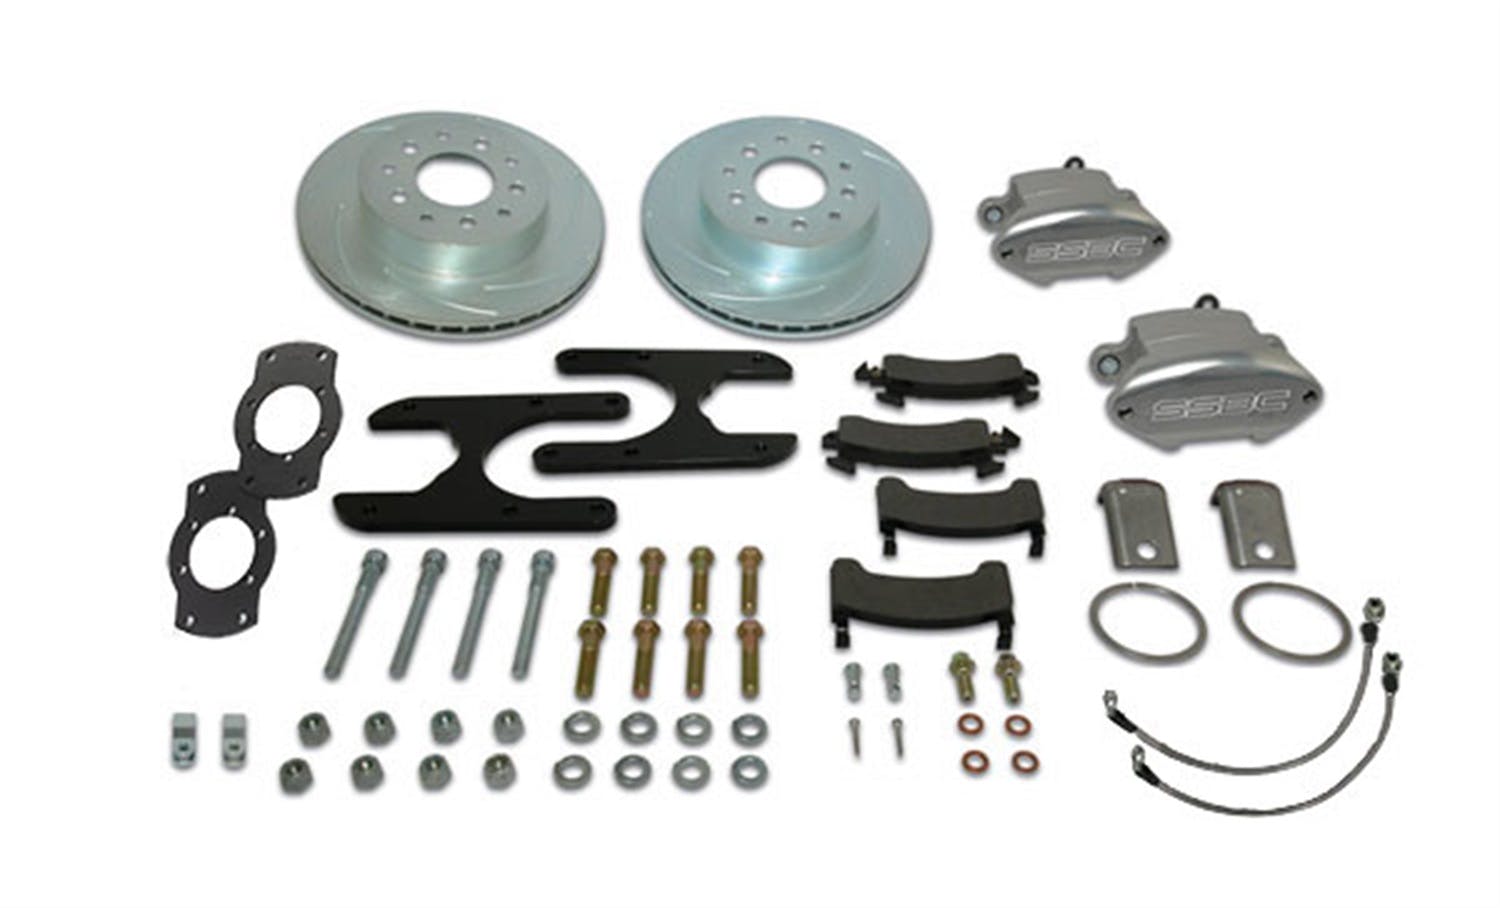 Stainless Steel Brakes A125-30R Kit A125-30 w/red calipers